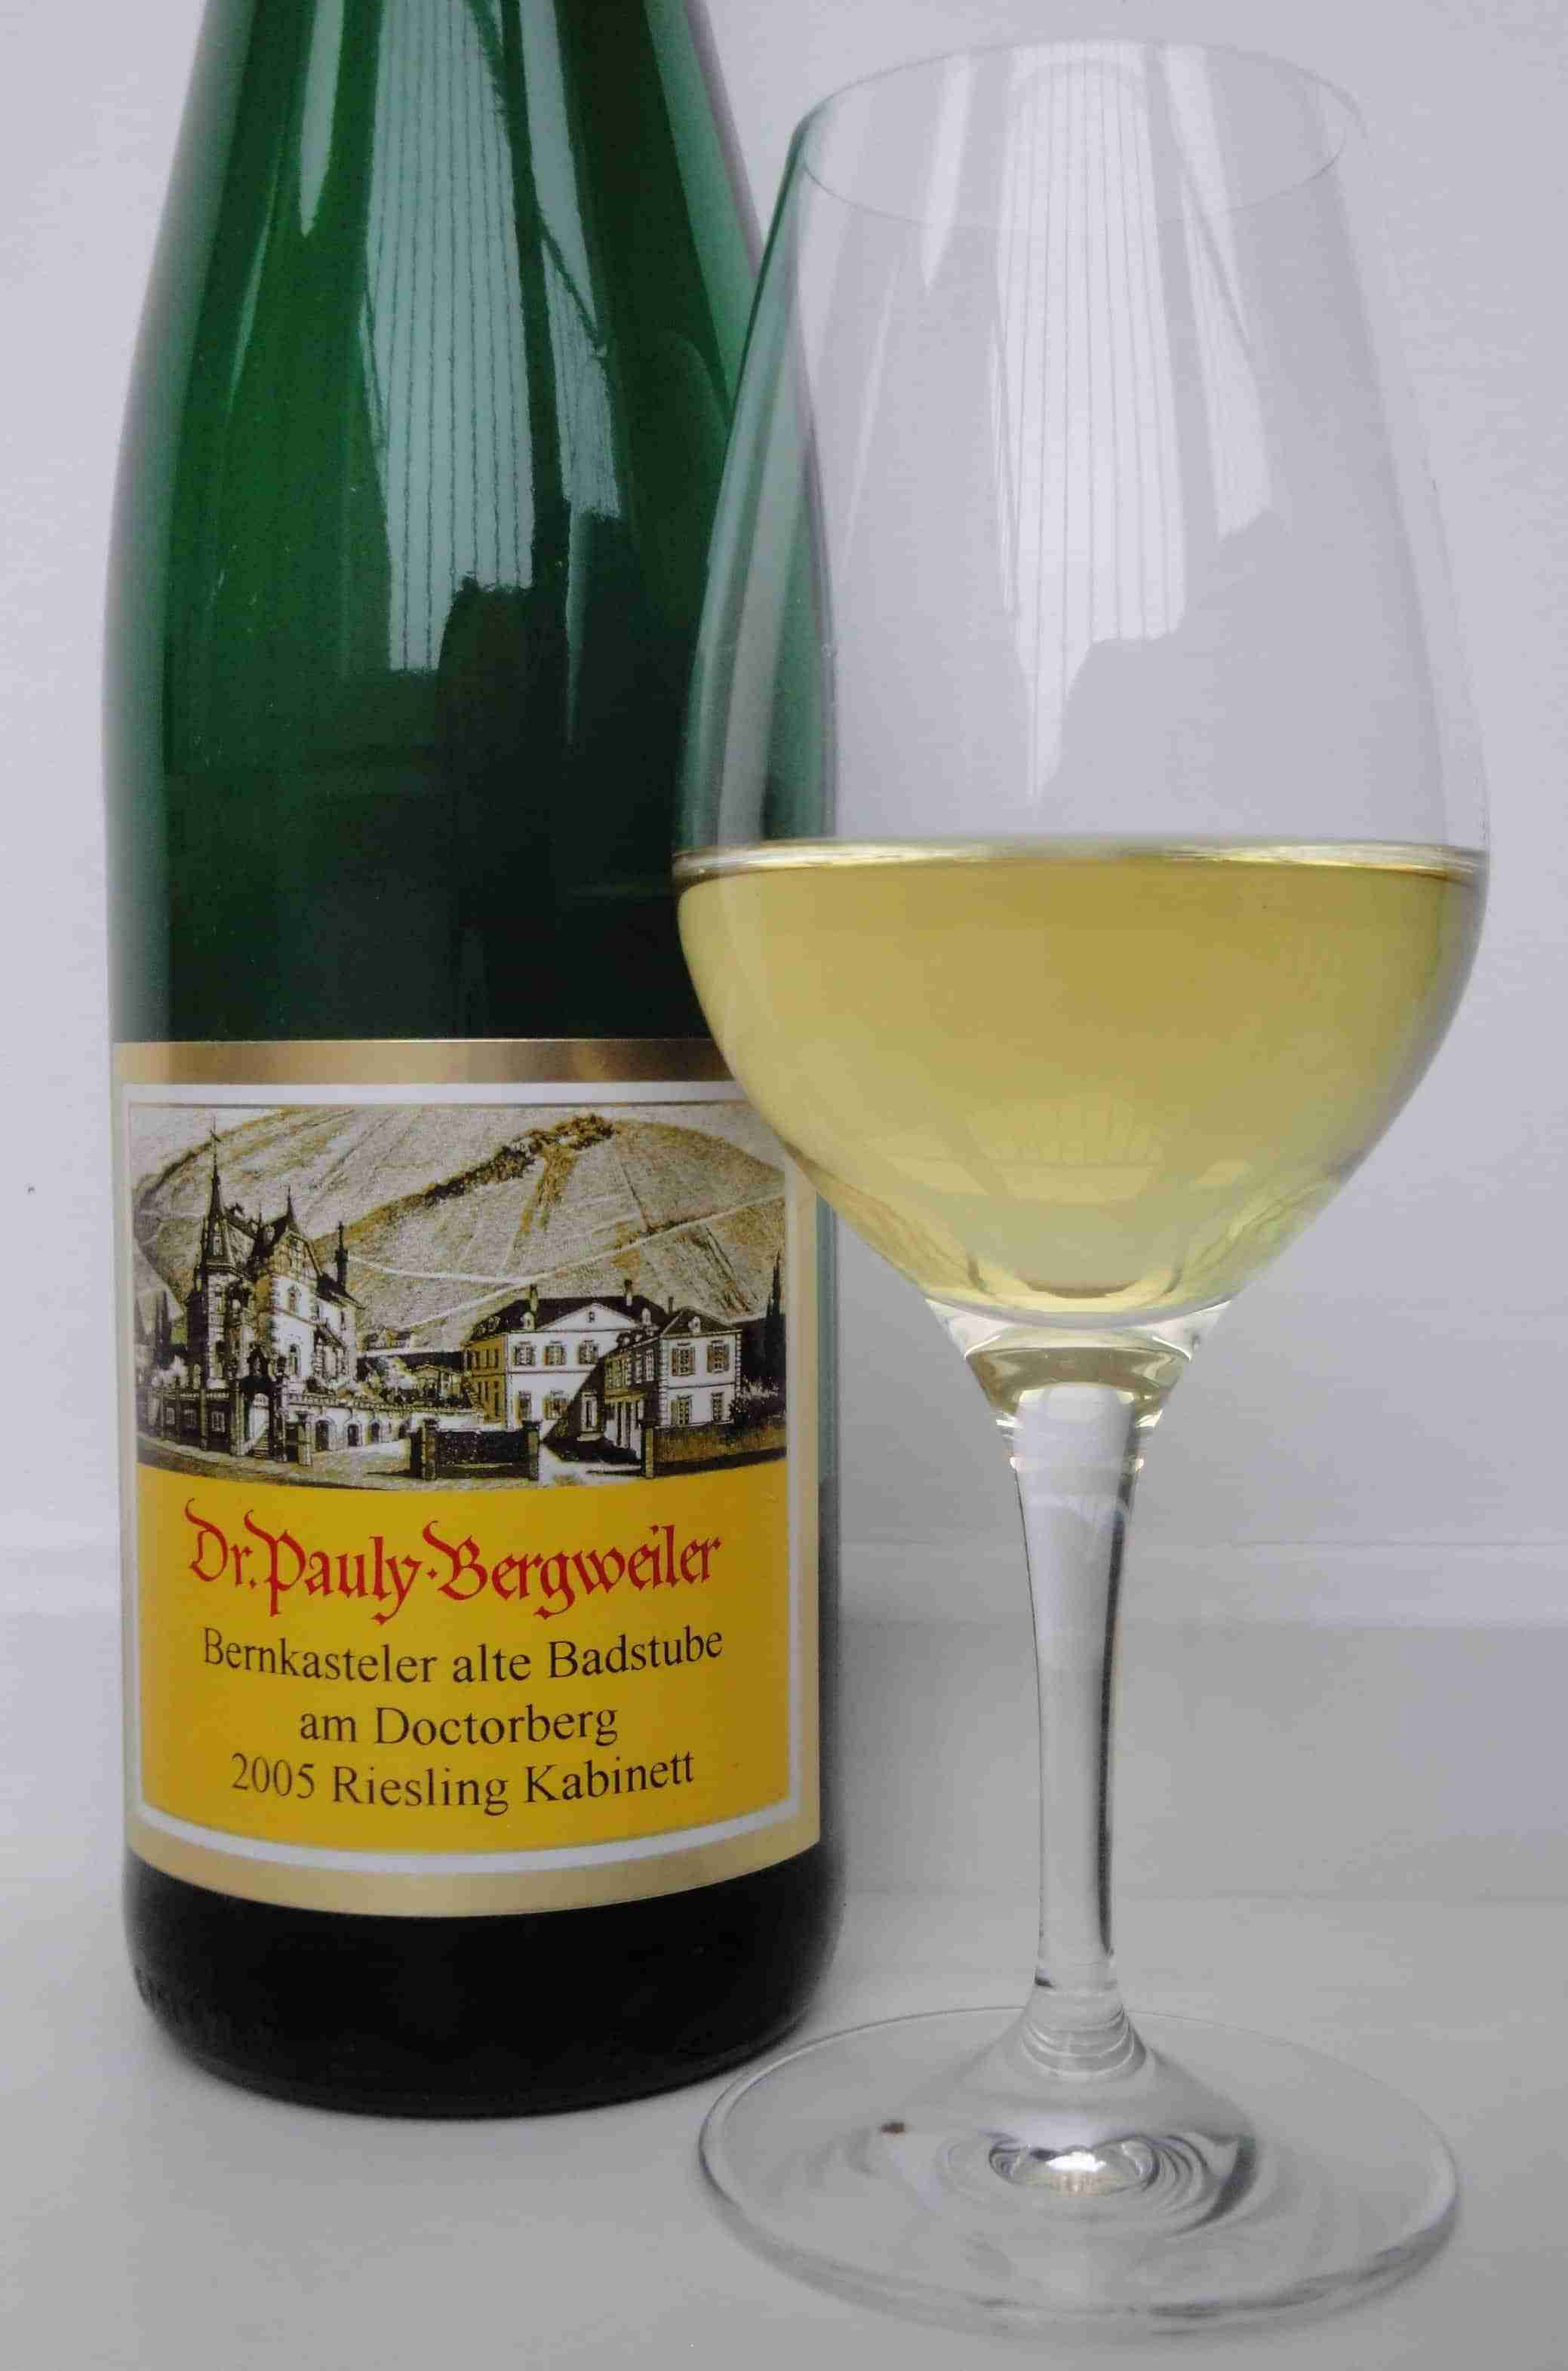 Wine on Wednesday: Riesling